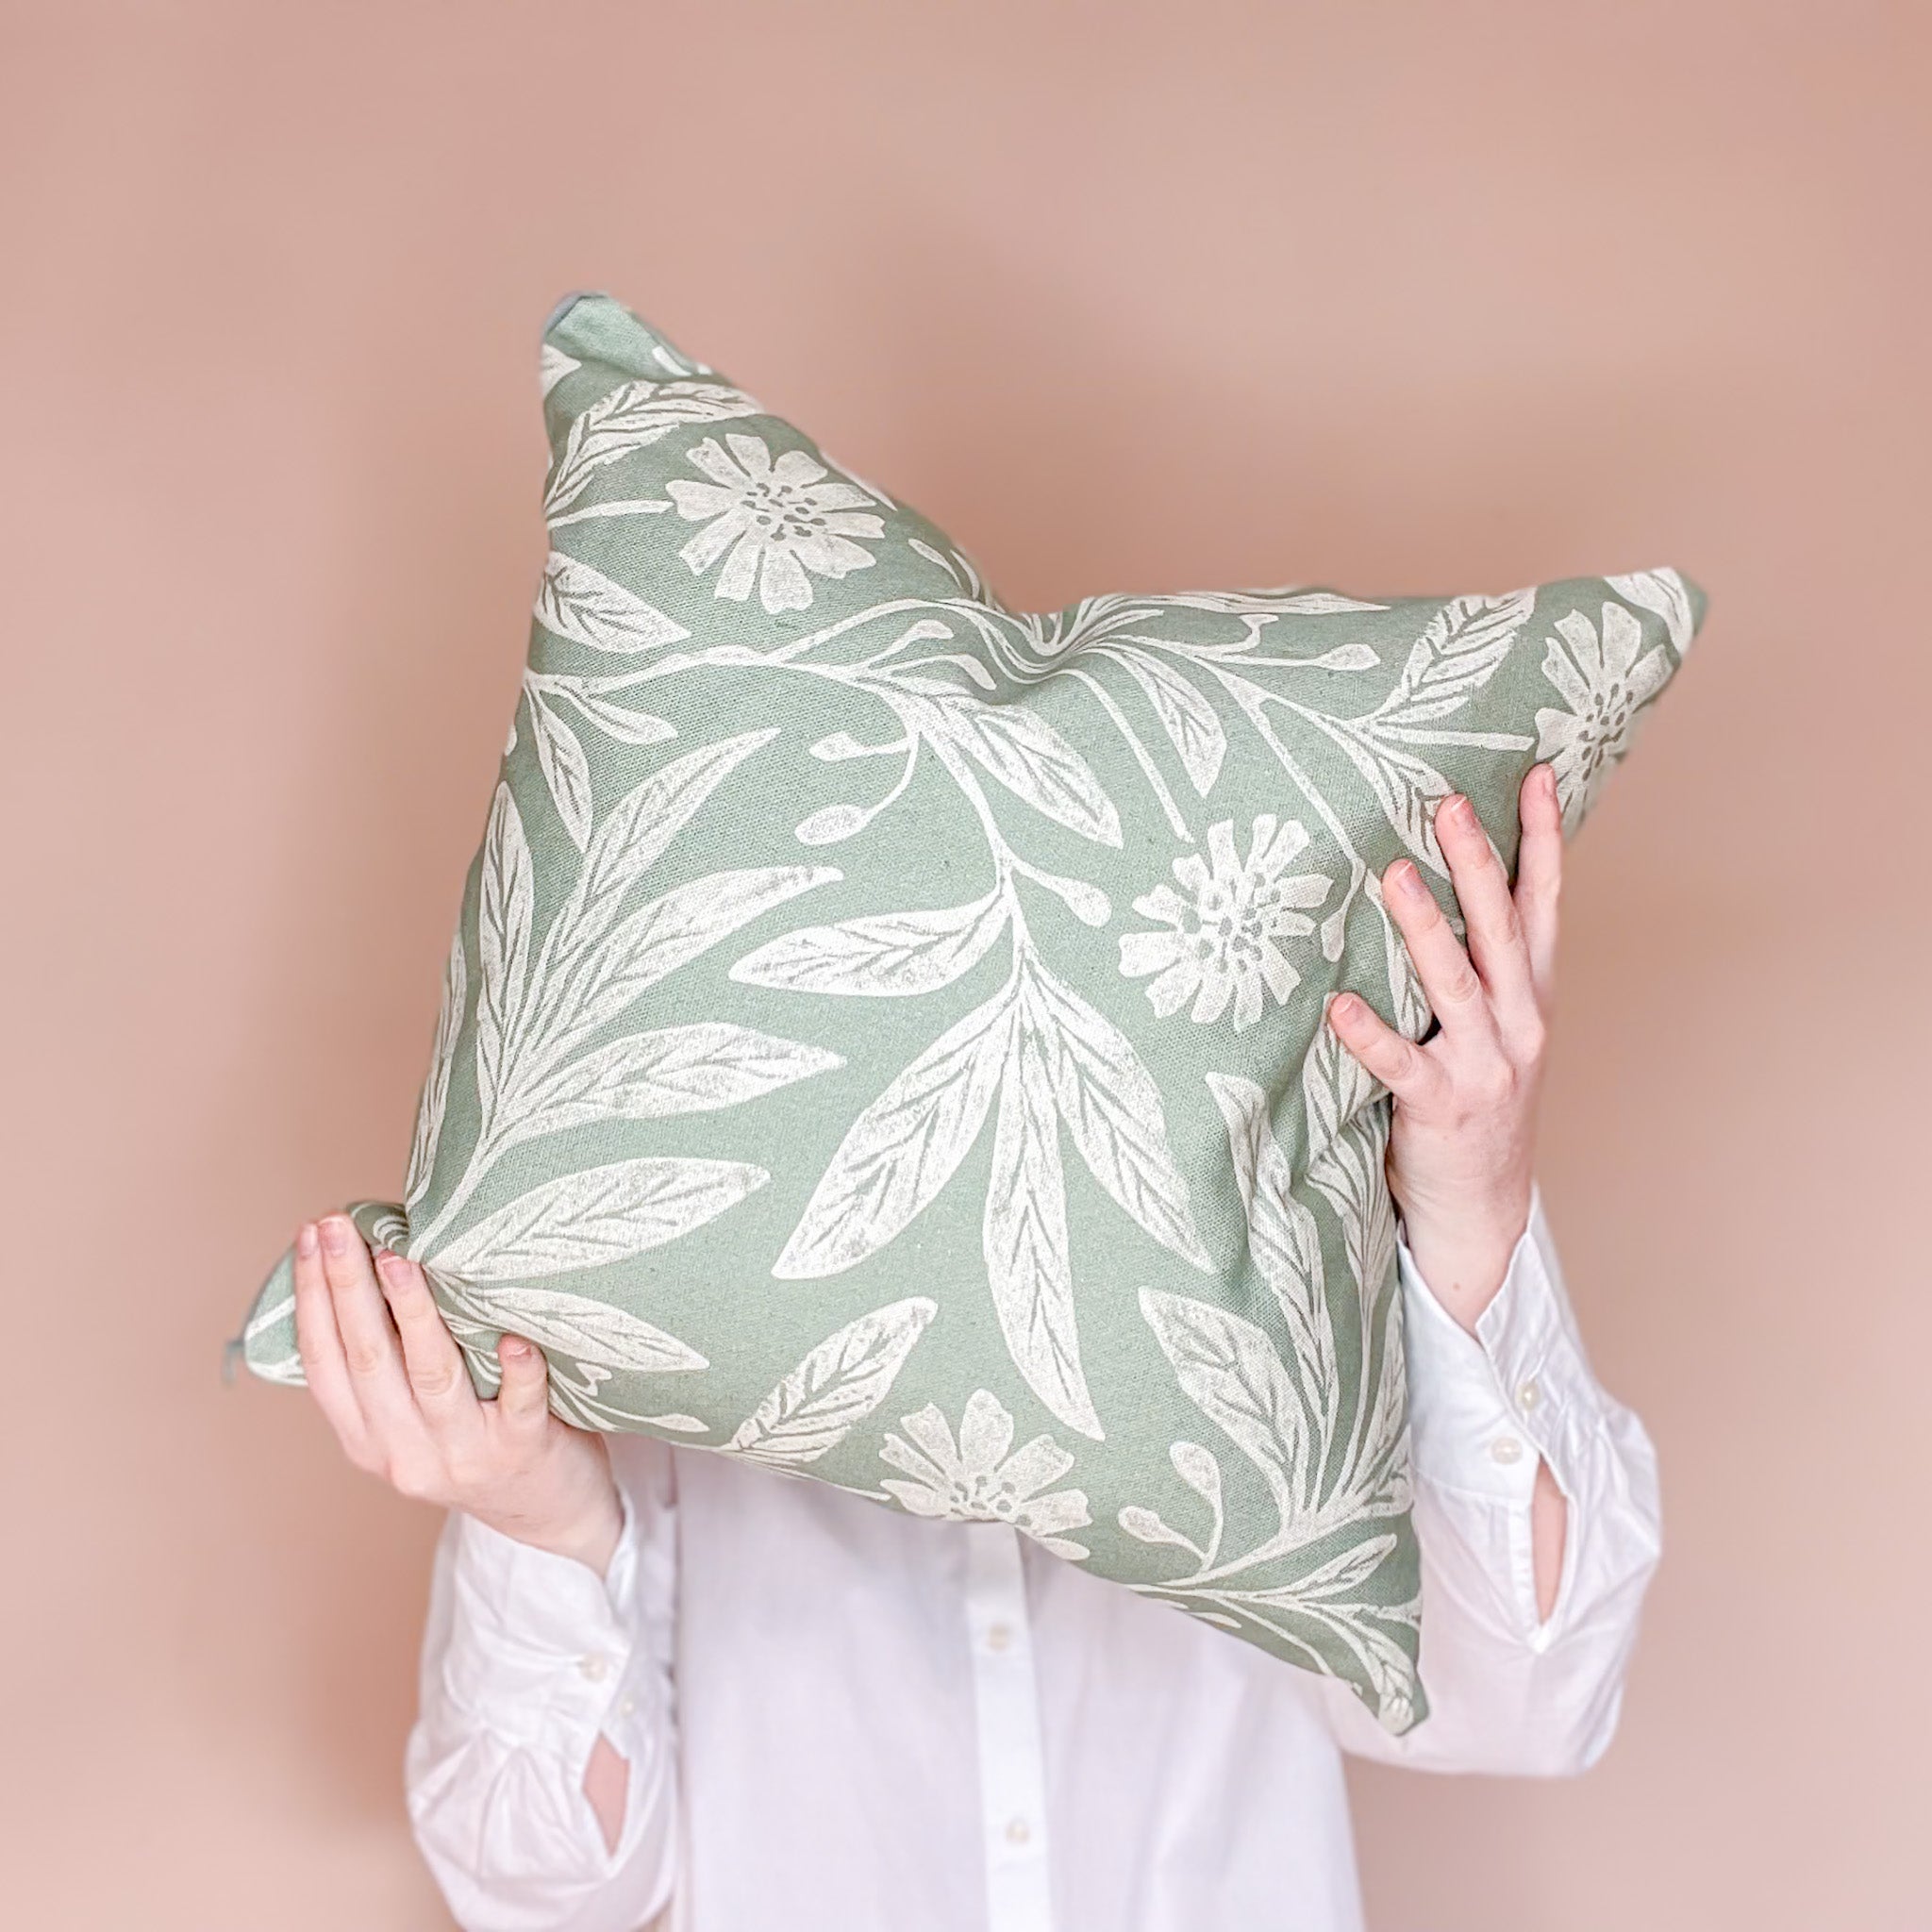 Meet Hills & Hedgerows Creator and Designer_Hiding face behind bold floral scatter cushion